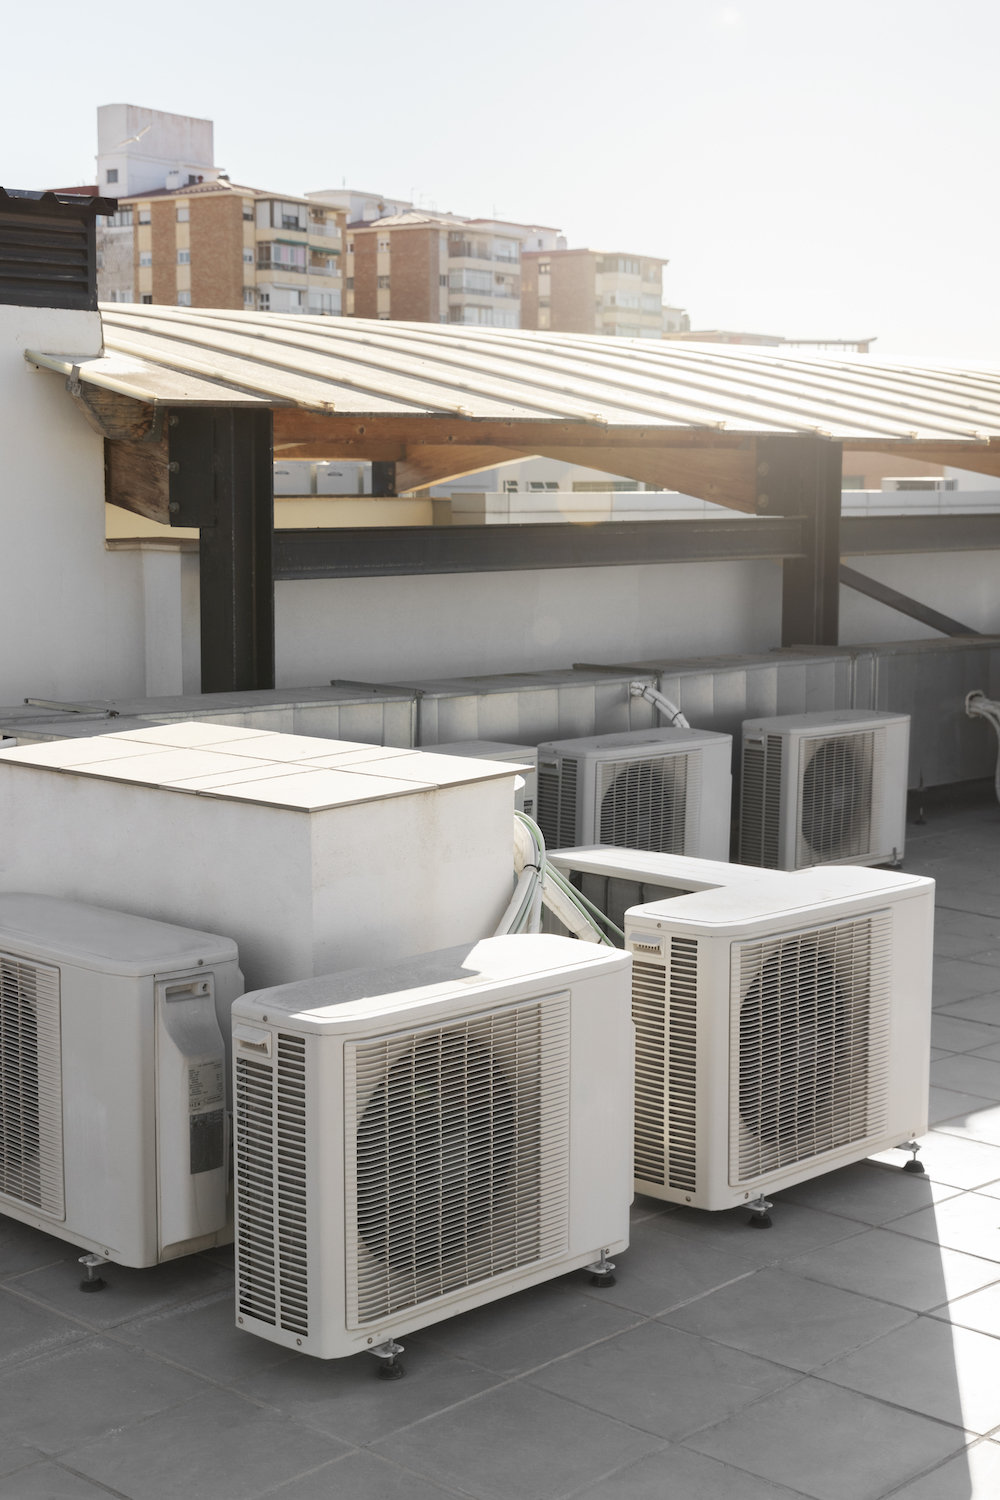 Maximize Efficiency and Profitability with HVAC Management Software